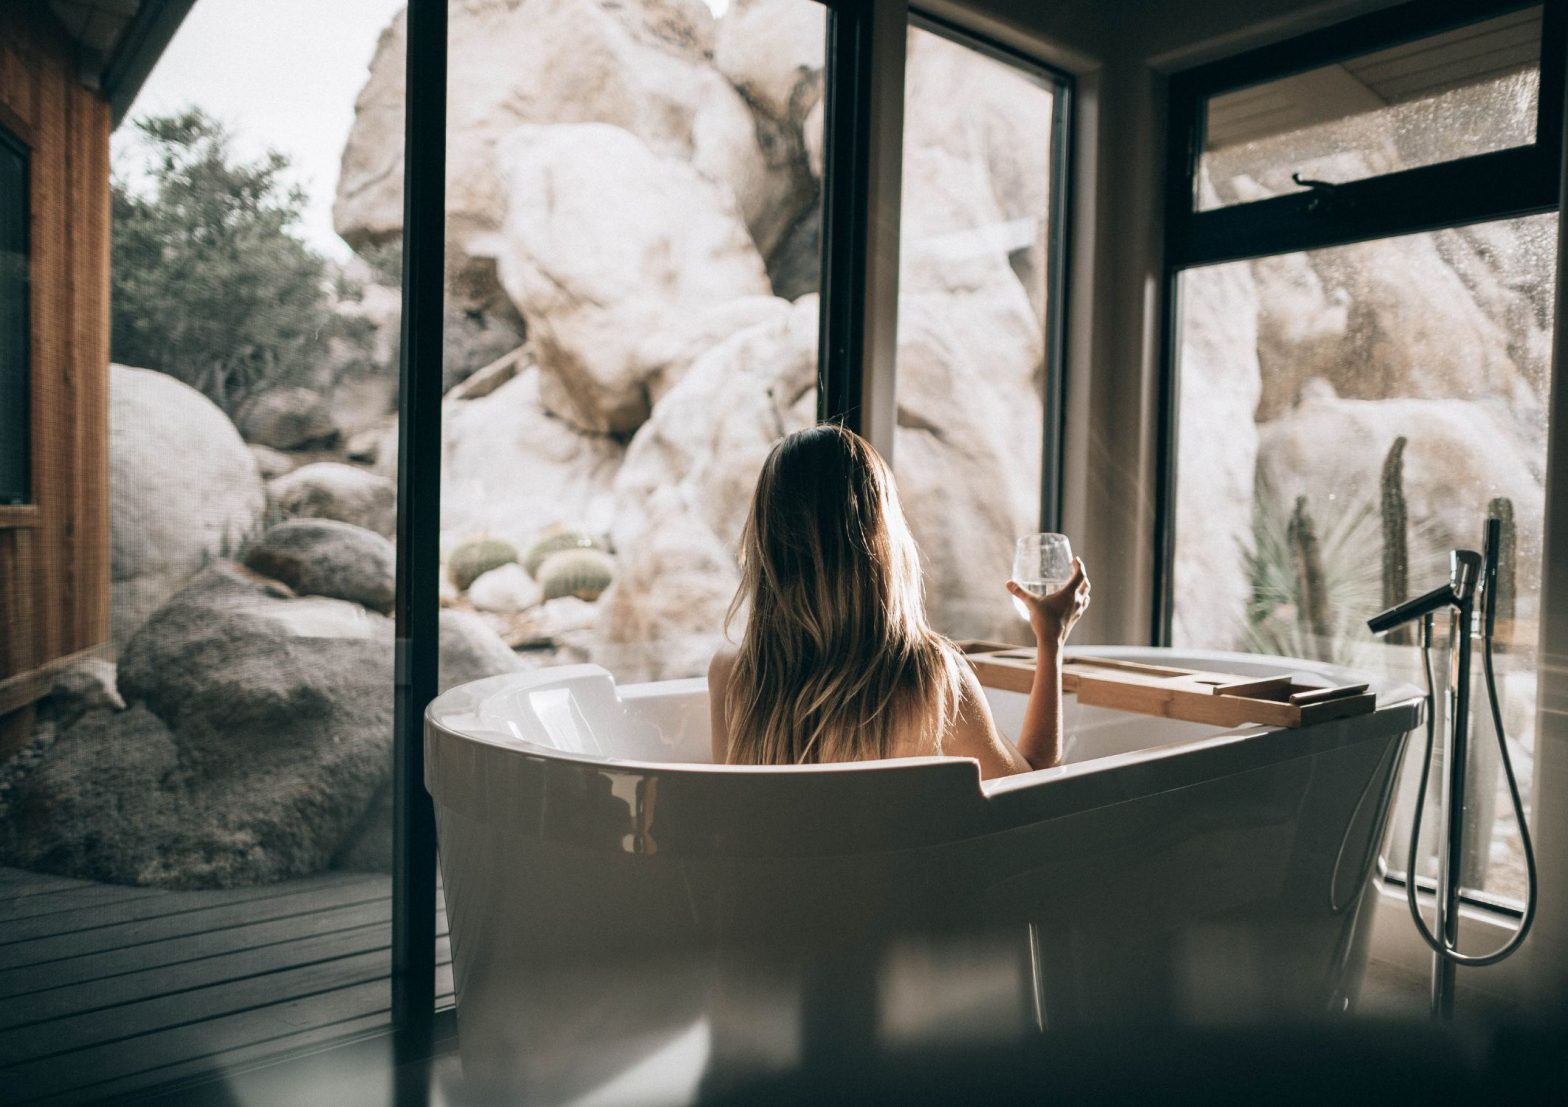 Image shows someone relaxing and unwinding in a large bathtub surrounded by glass and rocks outside.